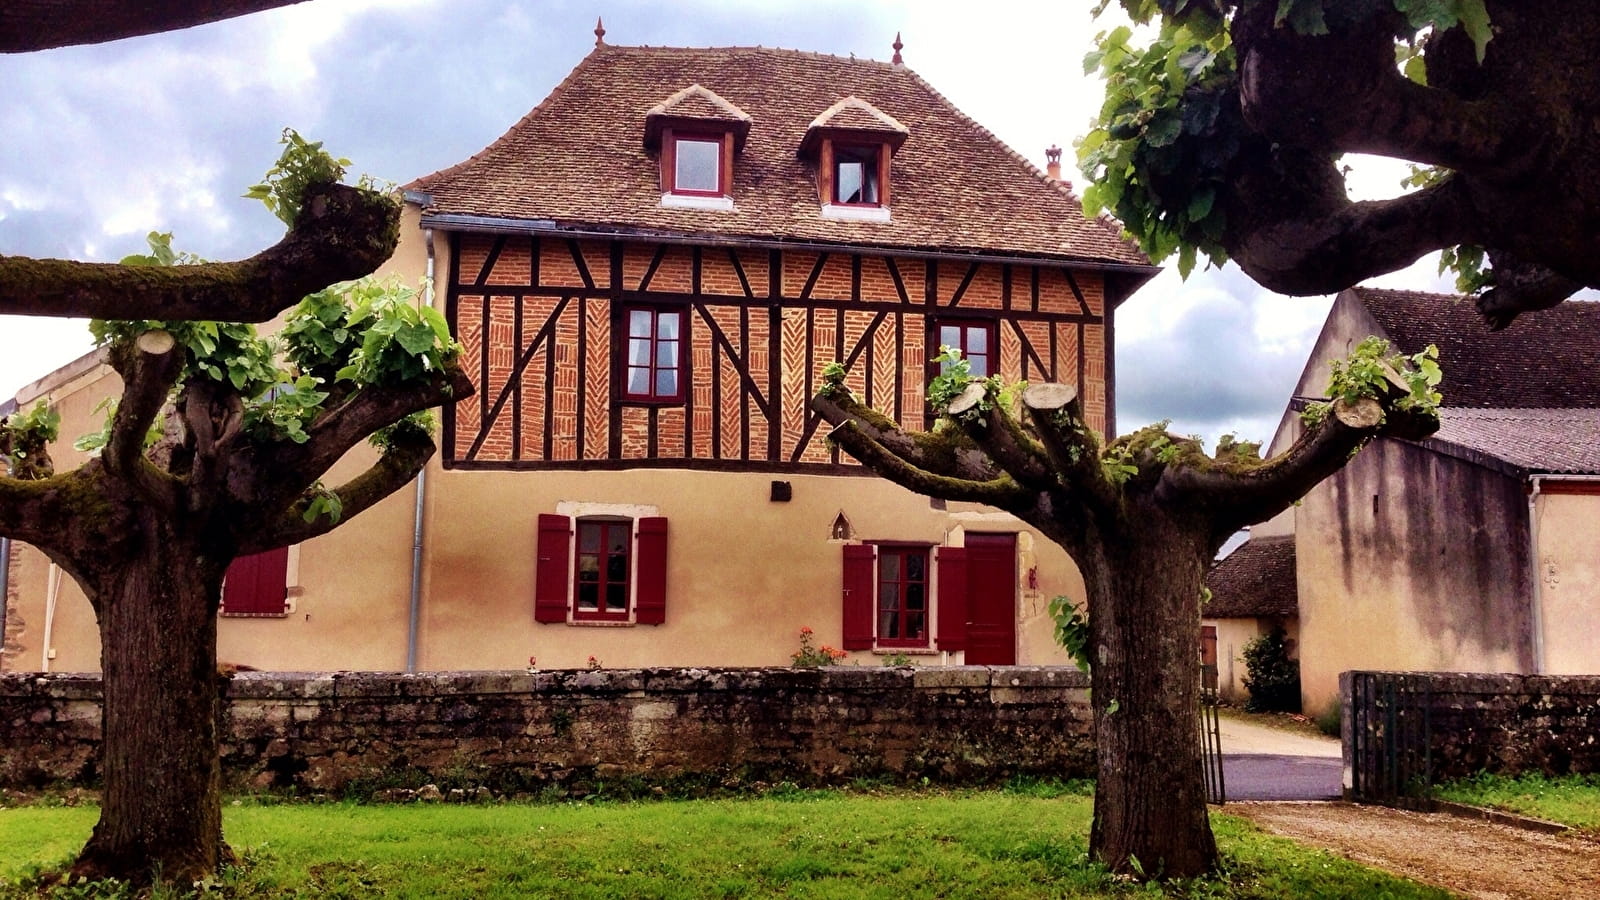 Jan's place in Burgundy